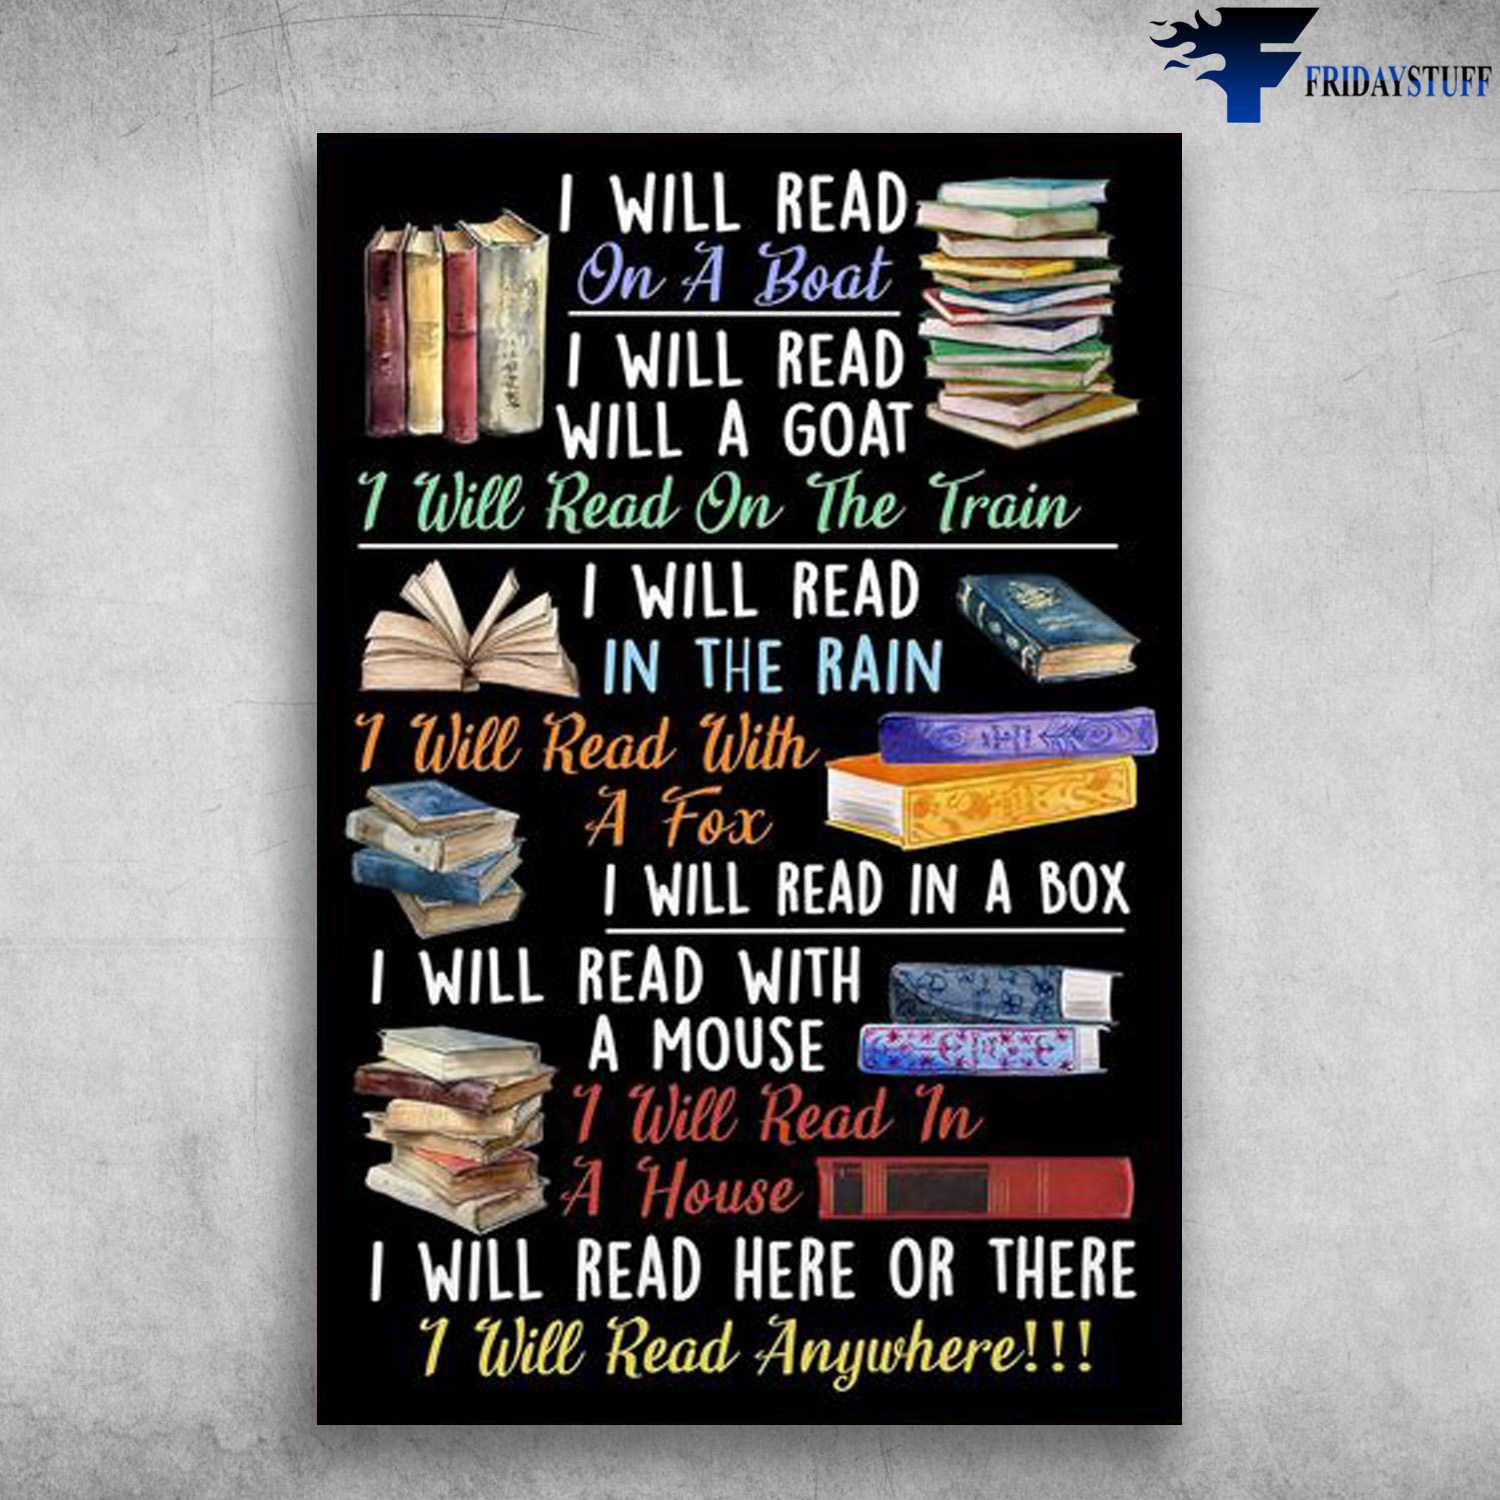 Book Lover, Reading Book, I Will Read, On A Boat, I Will Read Will A Goat, I Will Read On The Train, I Will Read In The Rain, I Will Read With A Fox, I Will Read In A Box